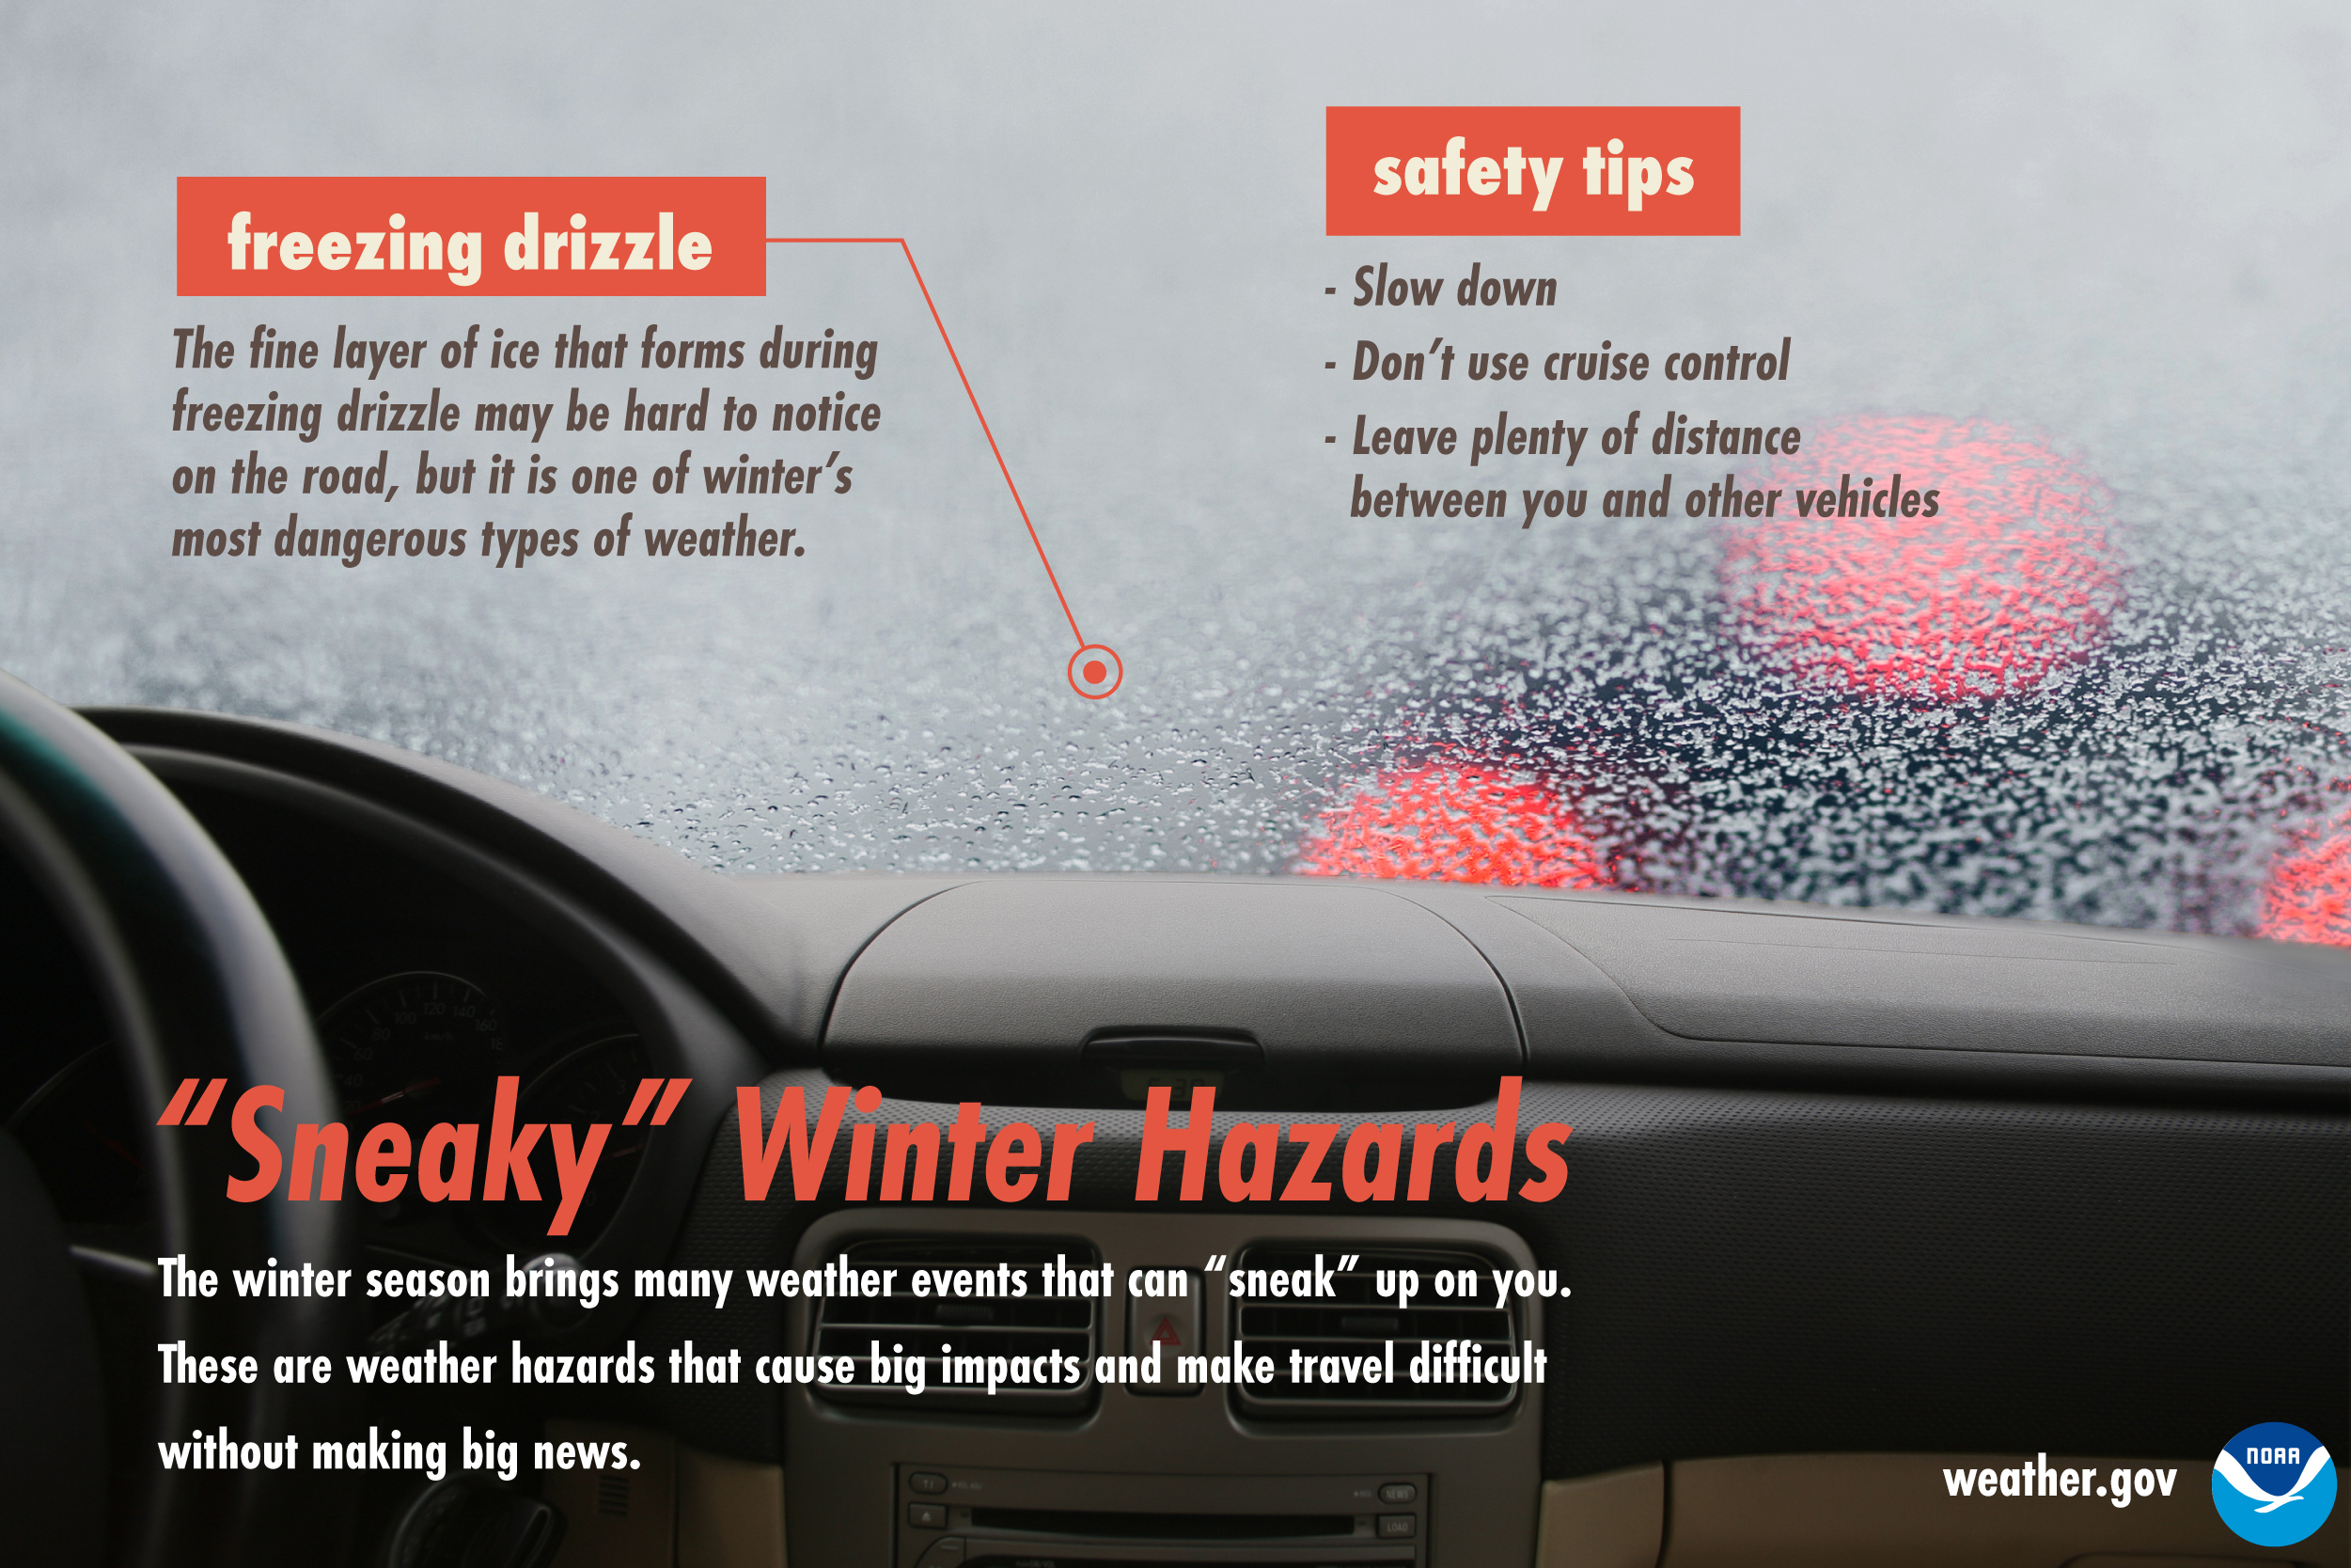 Sneaky Winter Hazards: Freezing drizzle. The fine layer of ice that forms during freezing drizzle may be hard to notice on the road, but it is one of winter's most dangerous types of weather. Safety tips: slow down; don't use cruise control; leave plenty of distance between you and other vehicles.